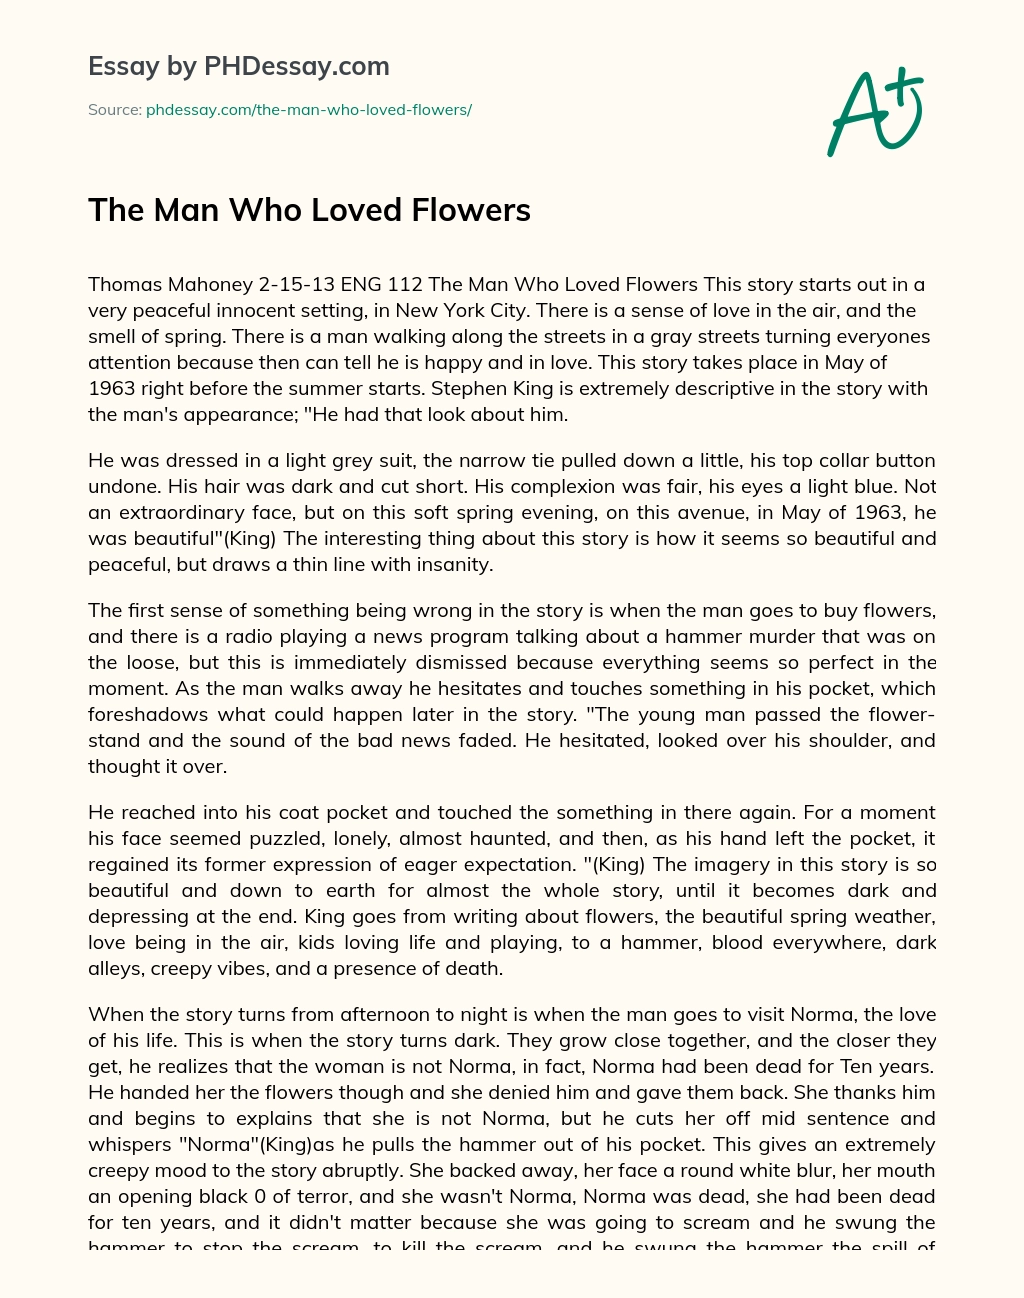 The Man Who Loved Flowers essay